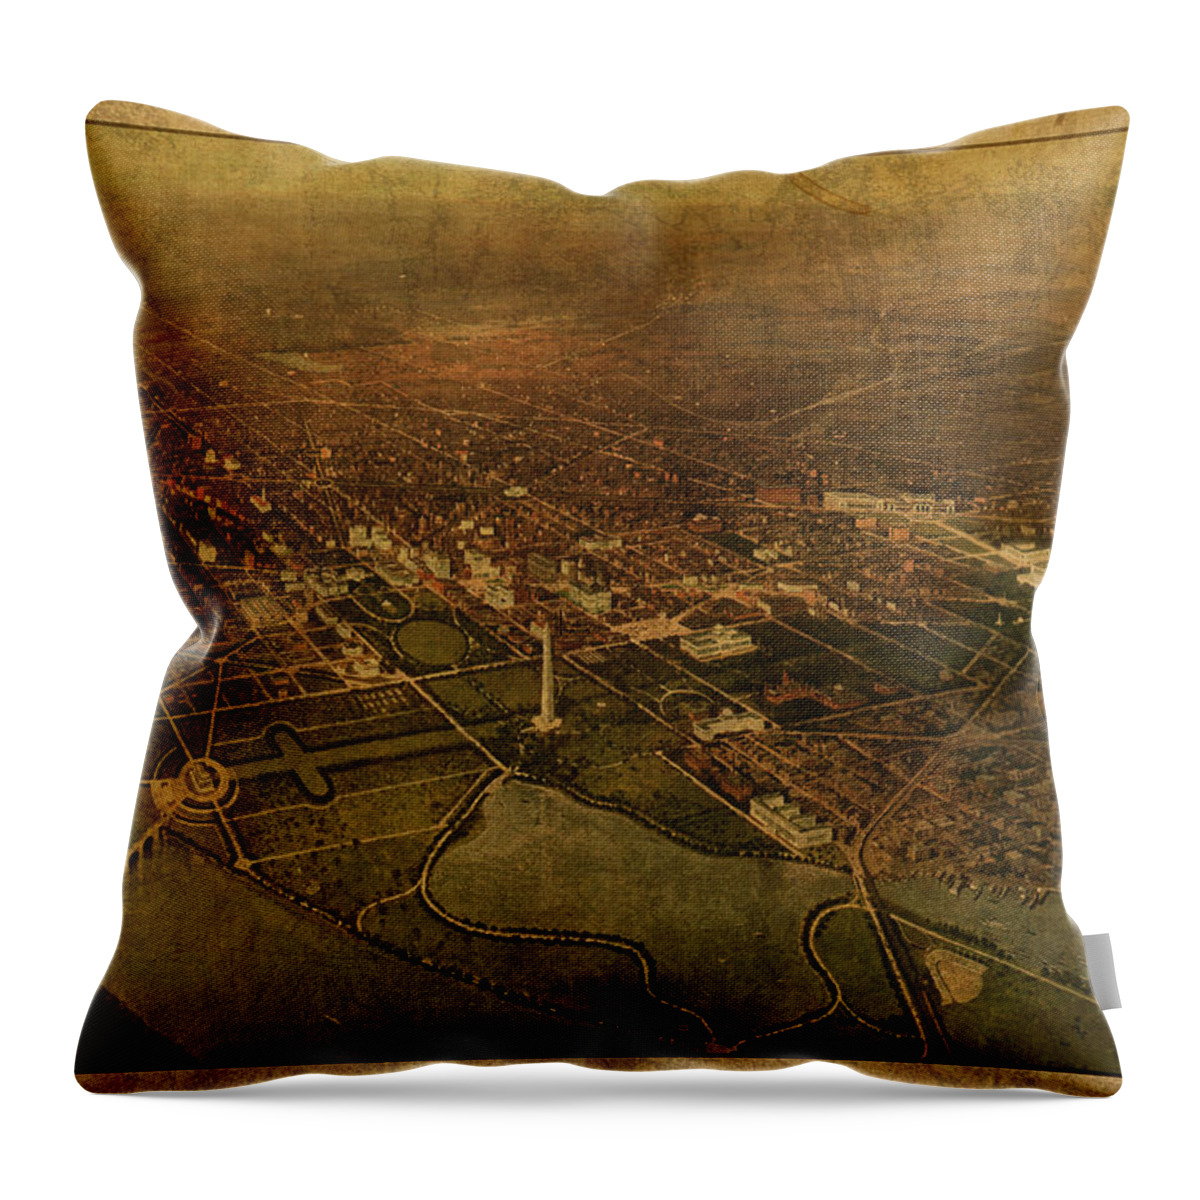 Washington Dc Throw Pillow featuring the mixed media Washington DC District of Columbia Vintage City Street Map Birds Eye View 1916 by Design Turnpike